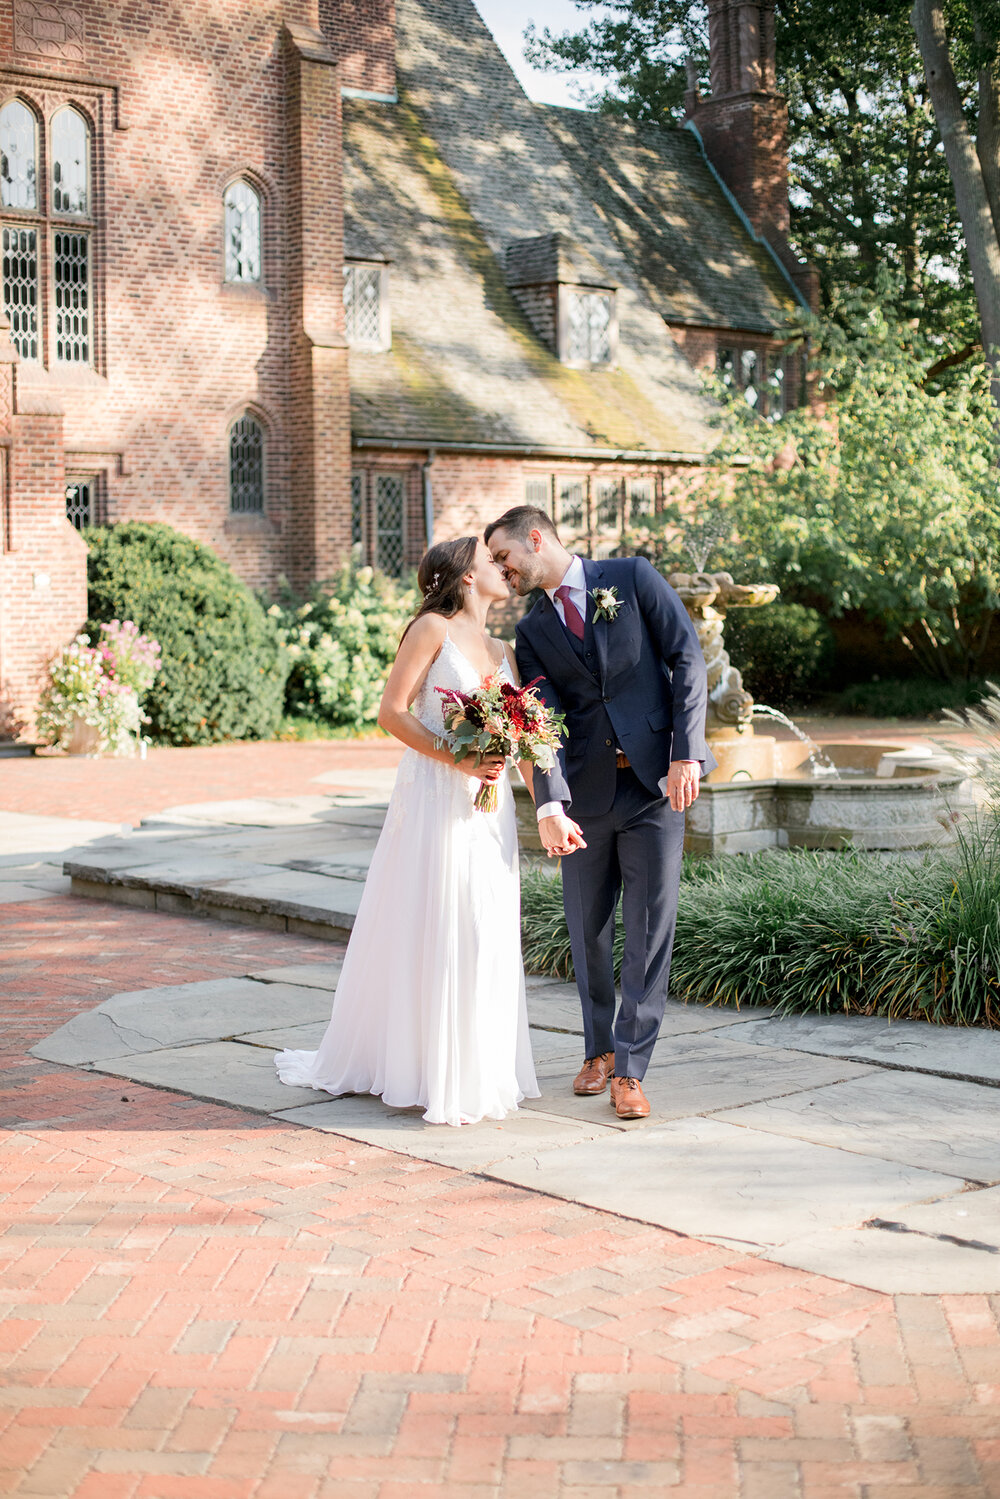 A Classic and Romantic Wedding at Aldie Mansion 